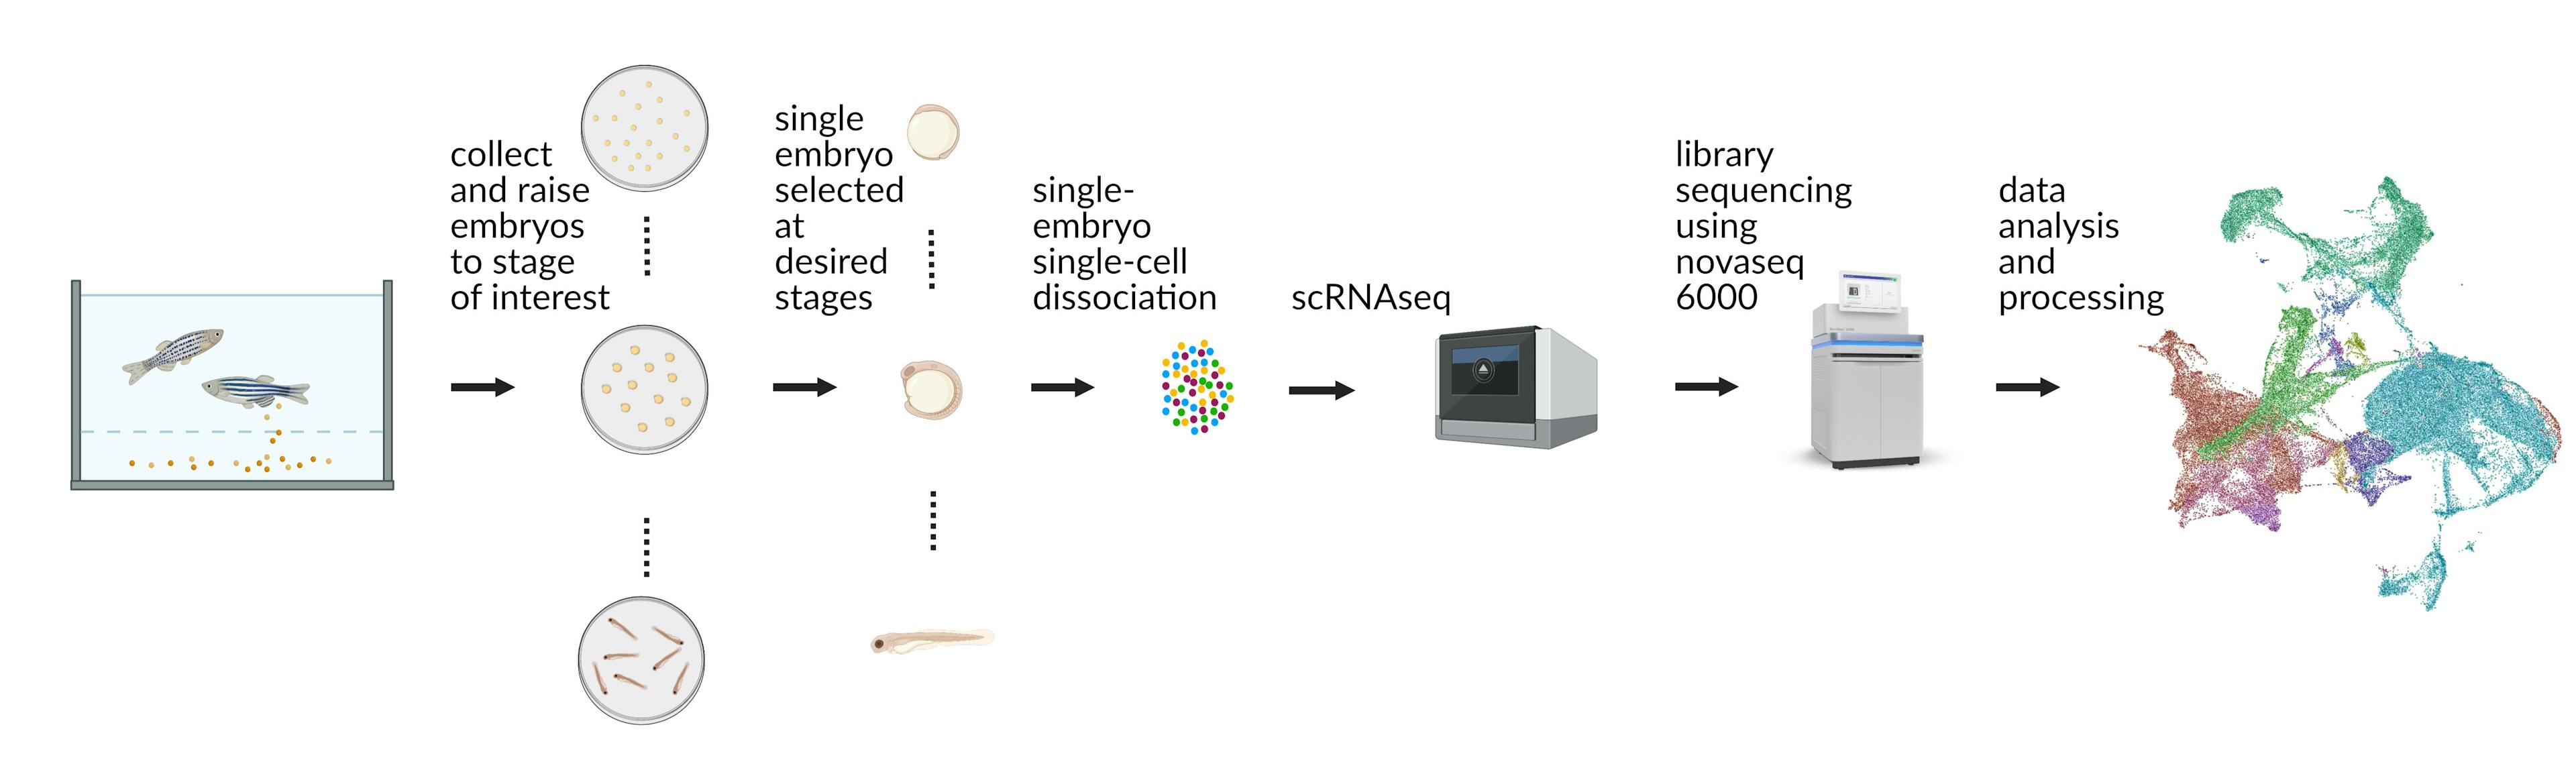 Single-embryo single-cell dissociation protocol from embryo collection, dissociation,  sequencing, and analysis